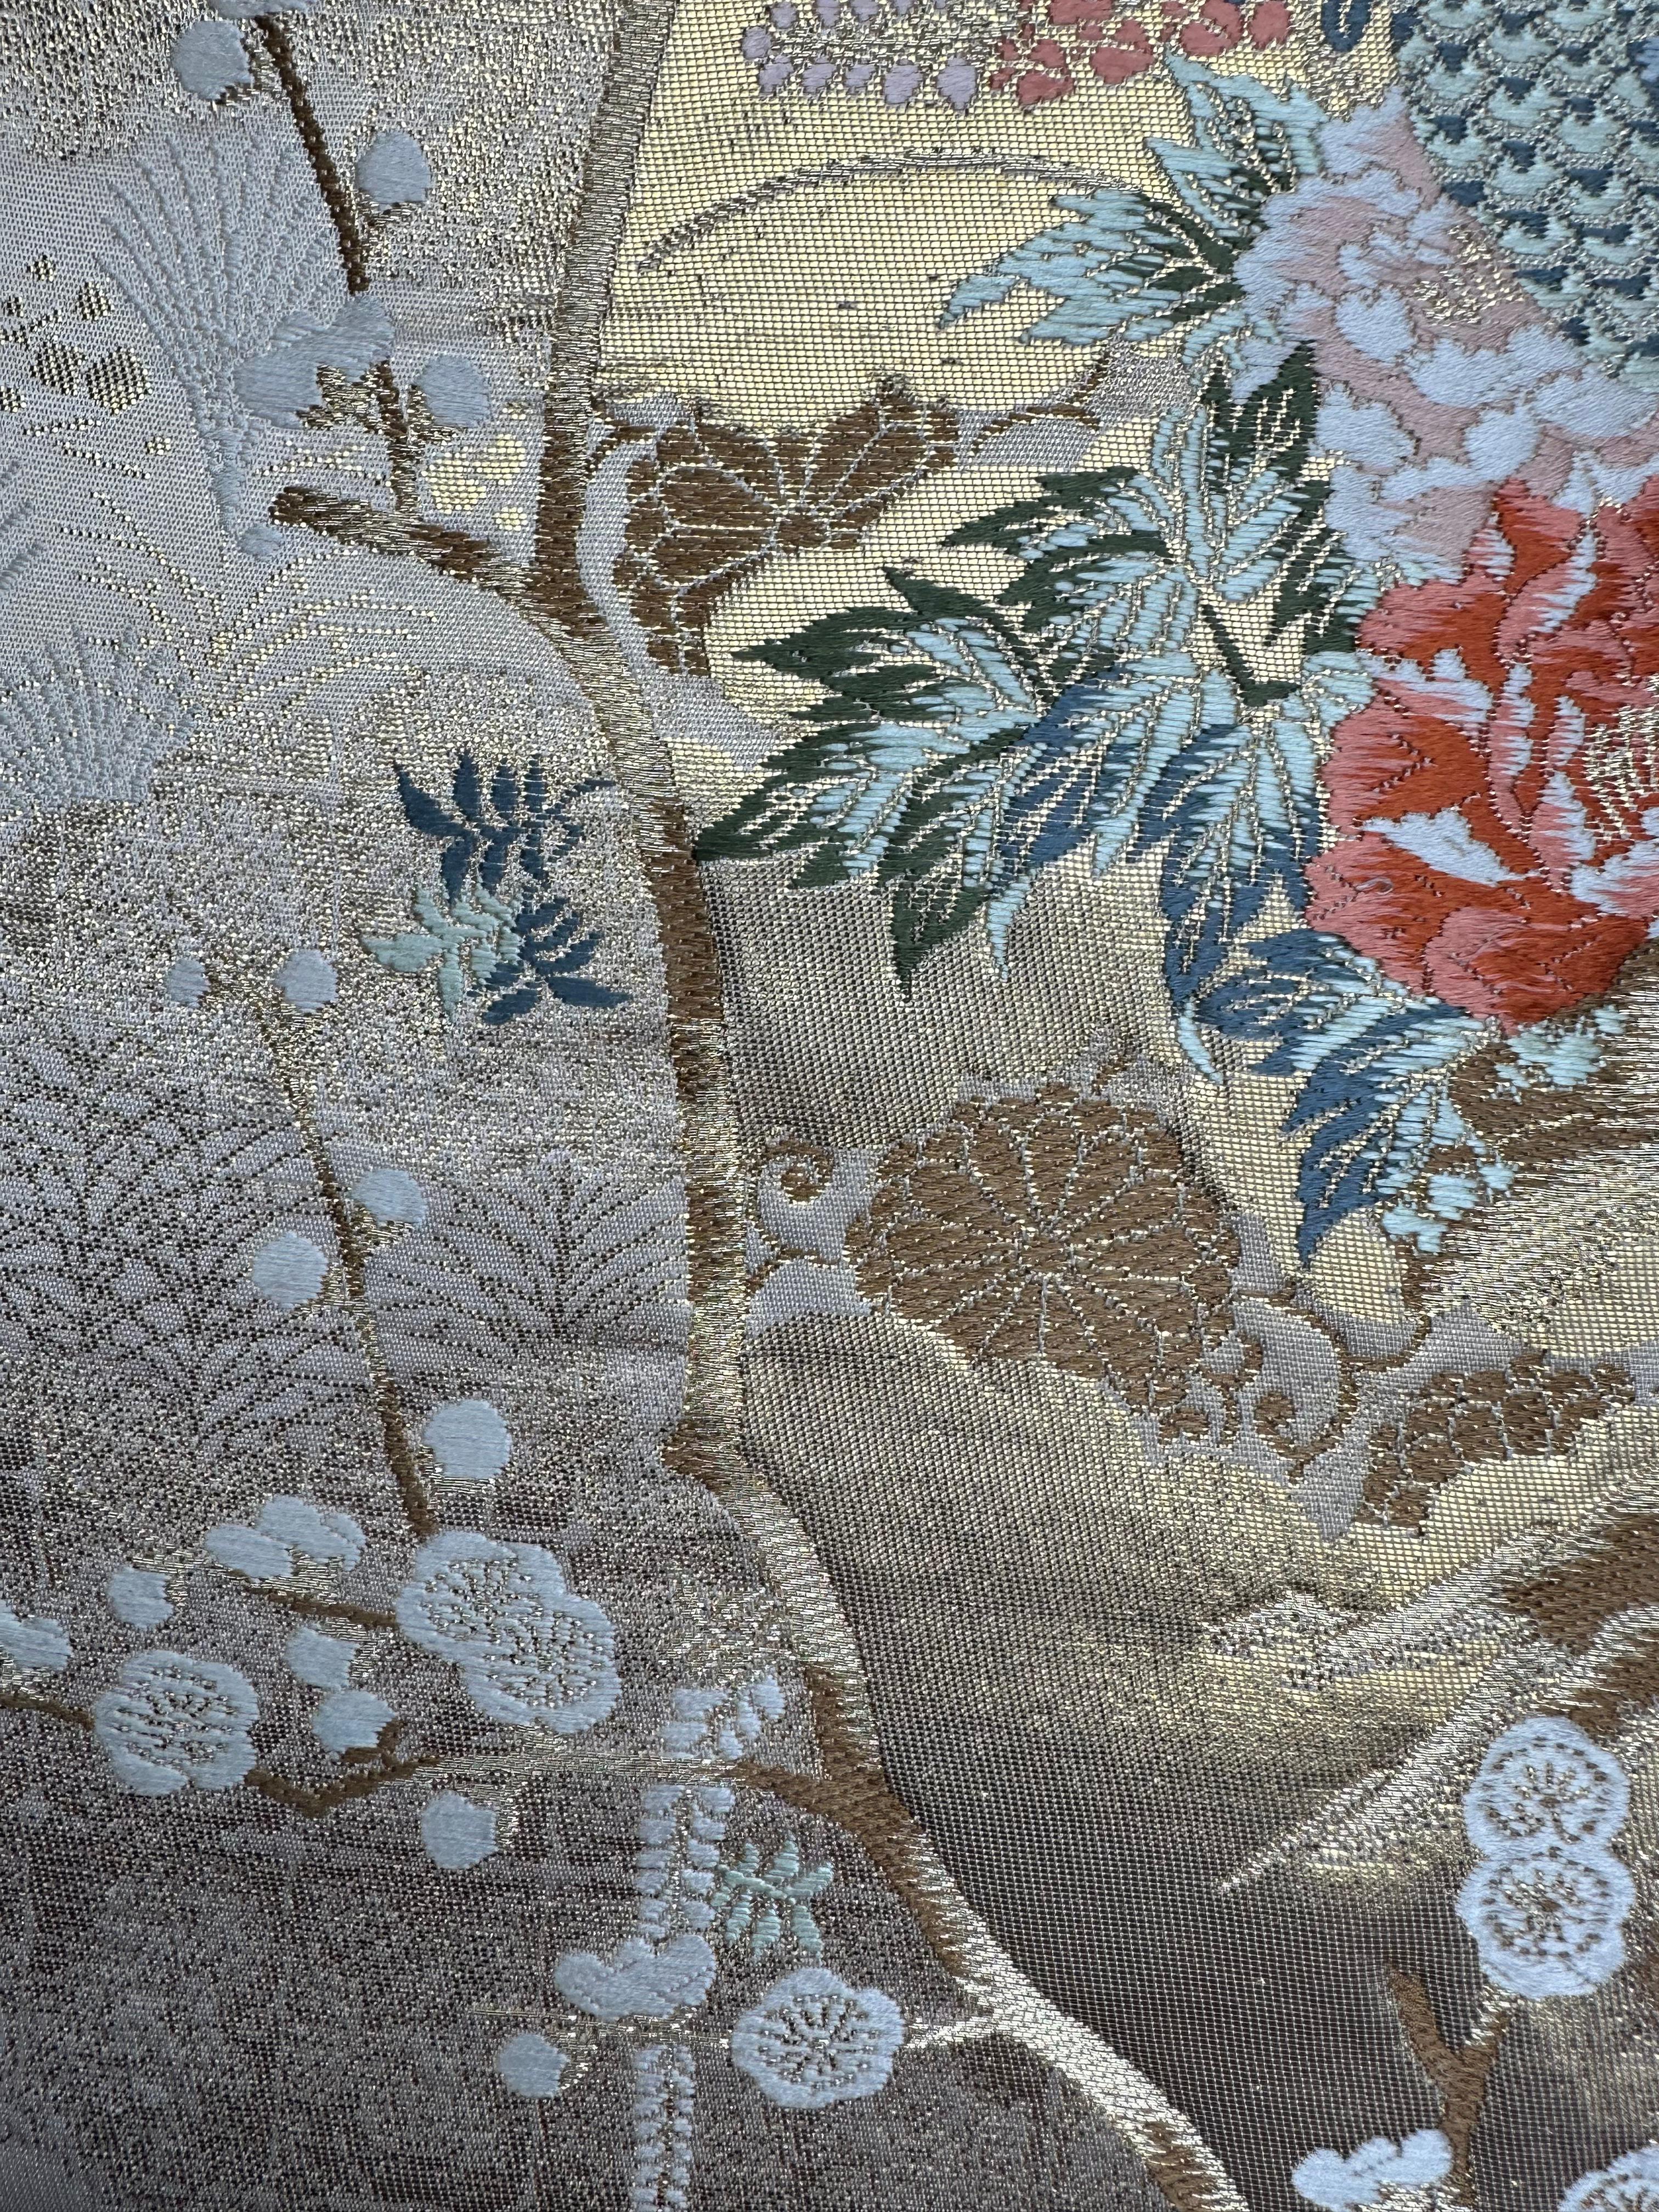 Kimono Tapestry “The Queen of Peacocks” , Japanese Art, Japanese Hanging Scroll In New Condition For Sale In Shibuya City, Tokyo